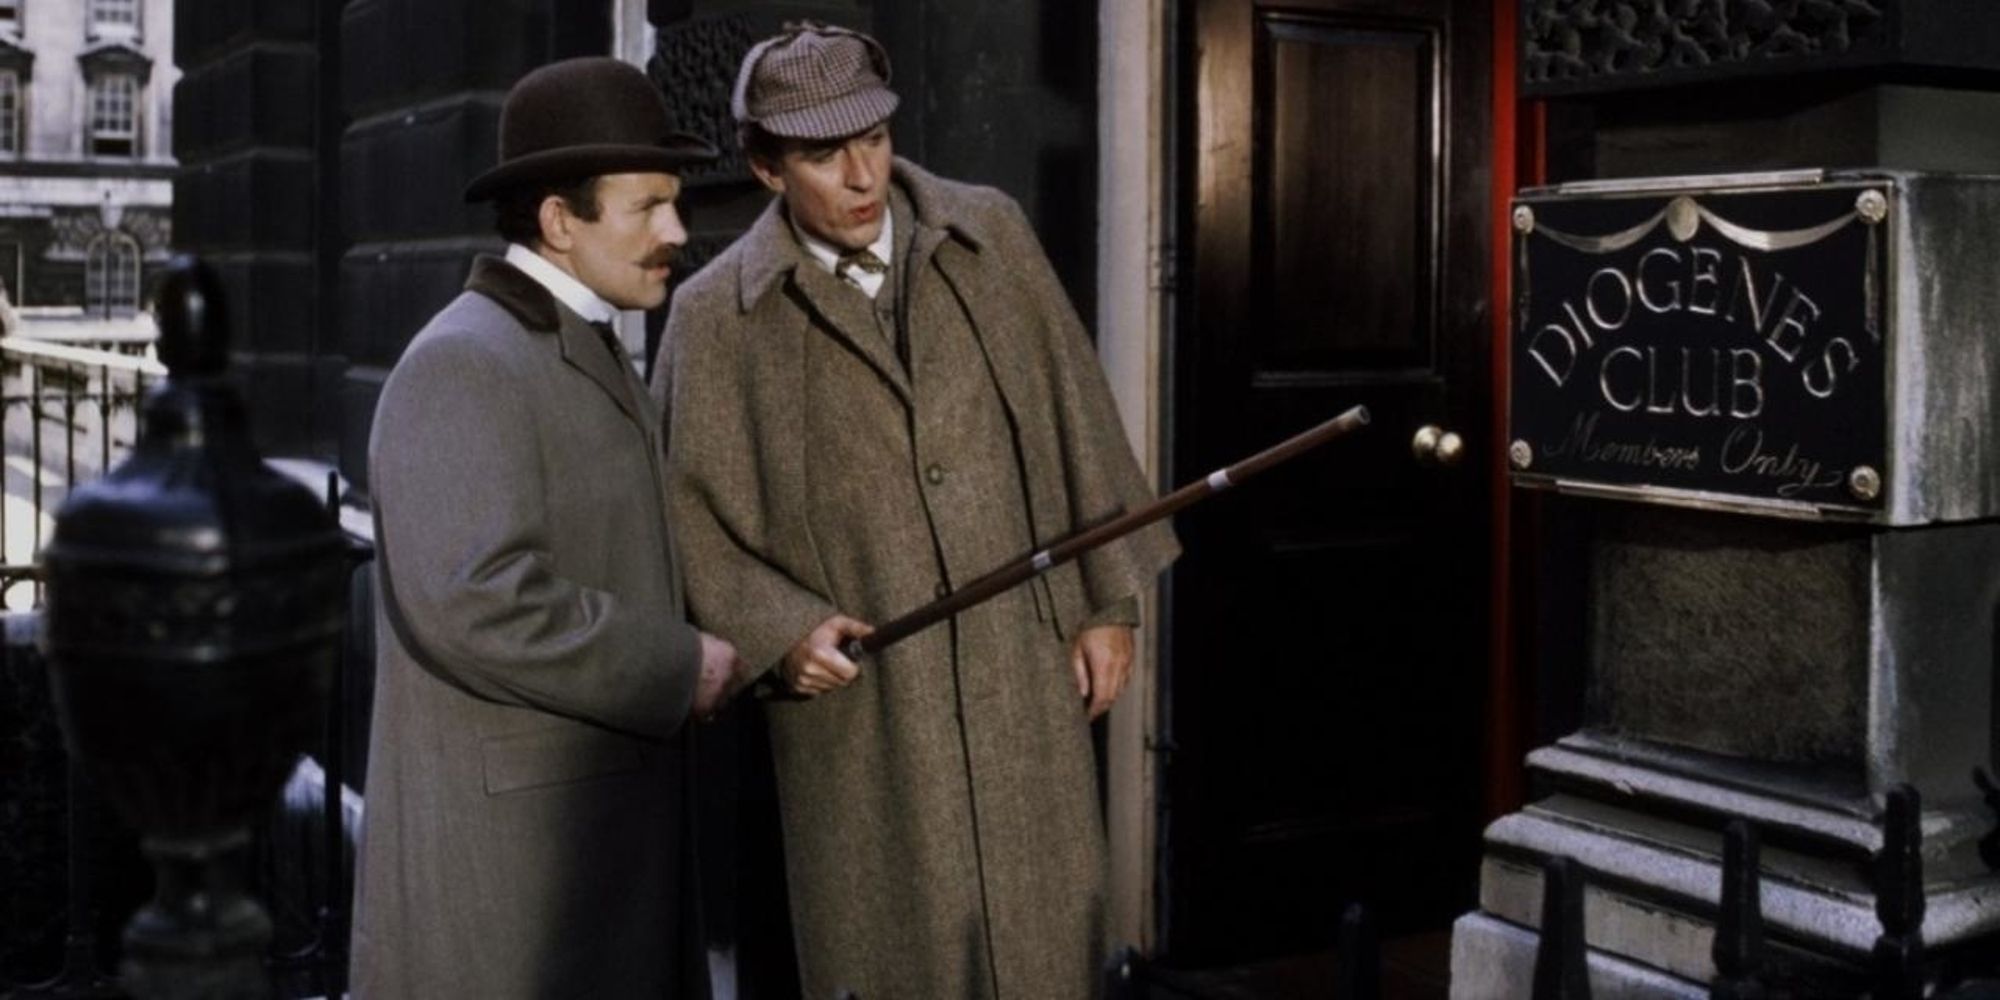 Sherlock Holmes and Watson outside the Diogenes Club in The Private Life Of Sherlock Holmes